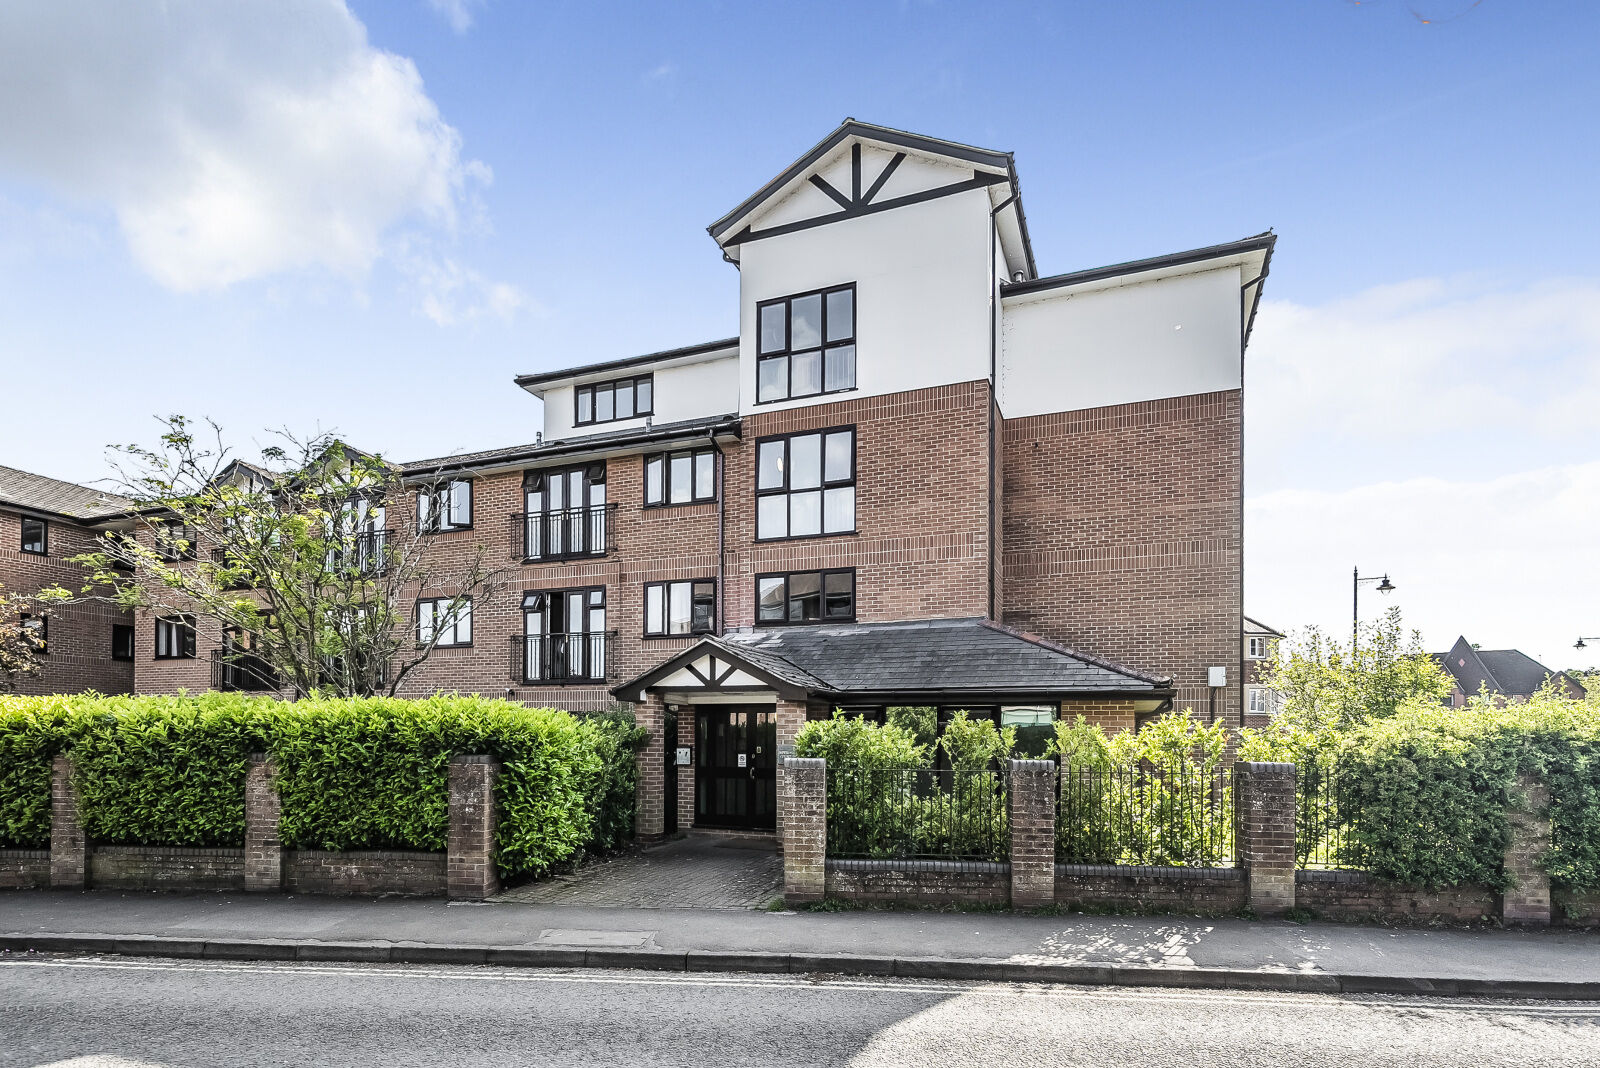 1 bedroom  flat for sale Imperial Court, Station Road, RG9, main image